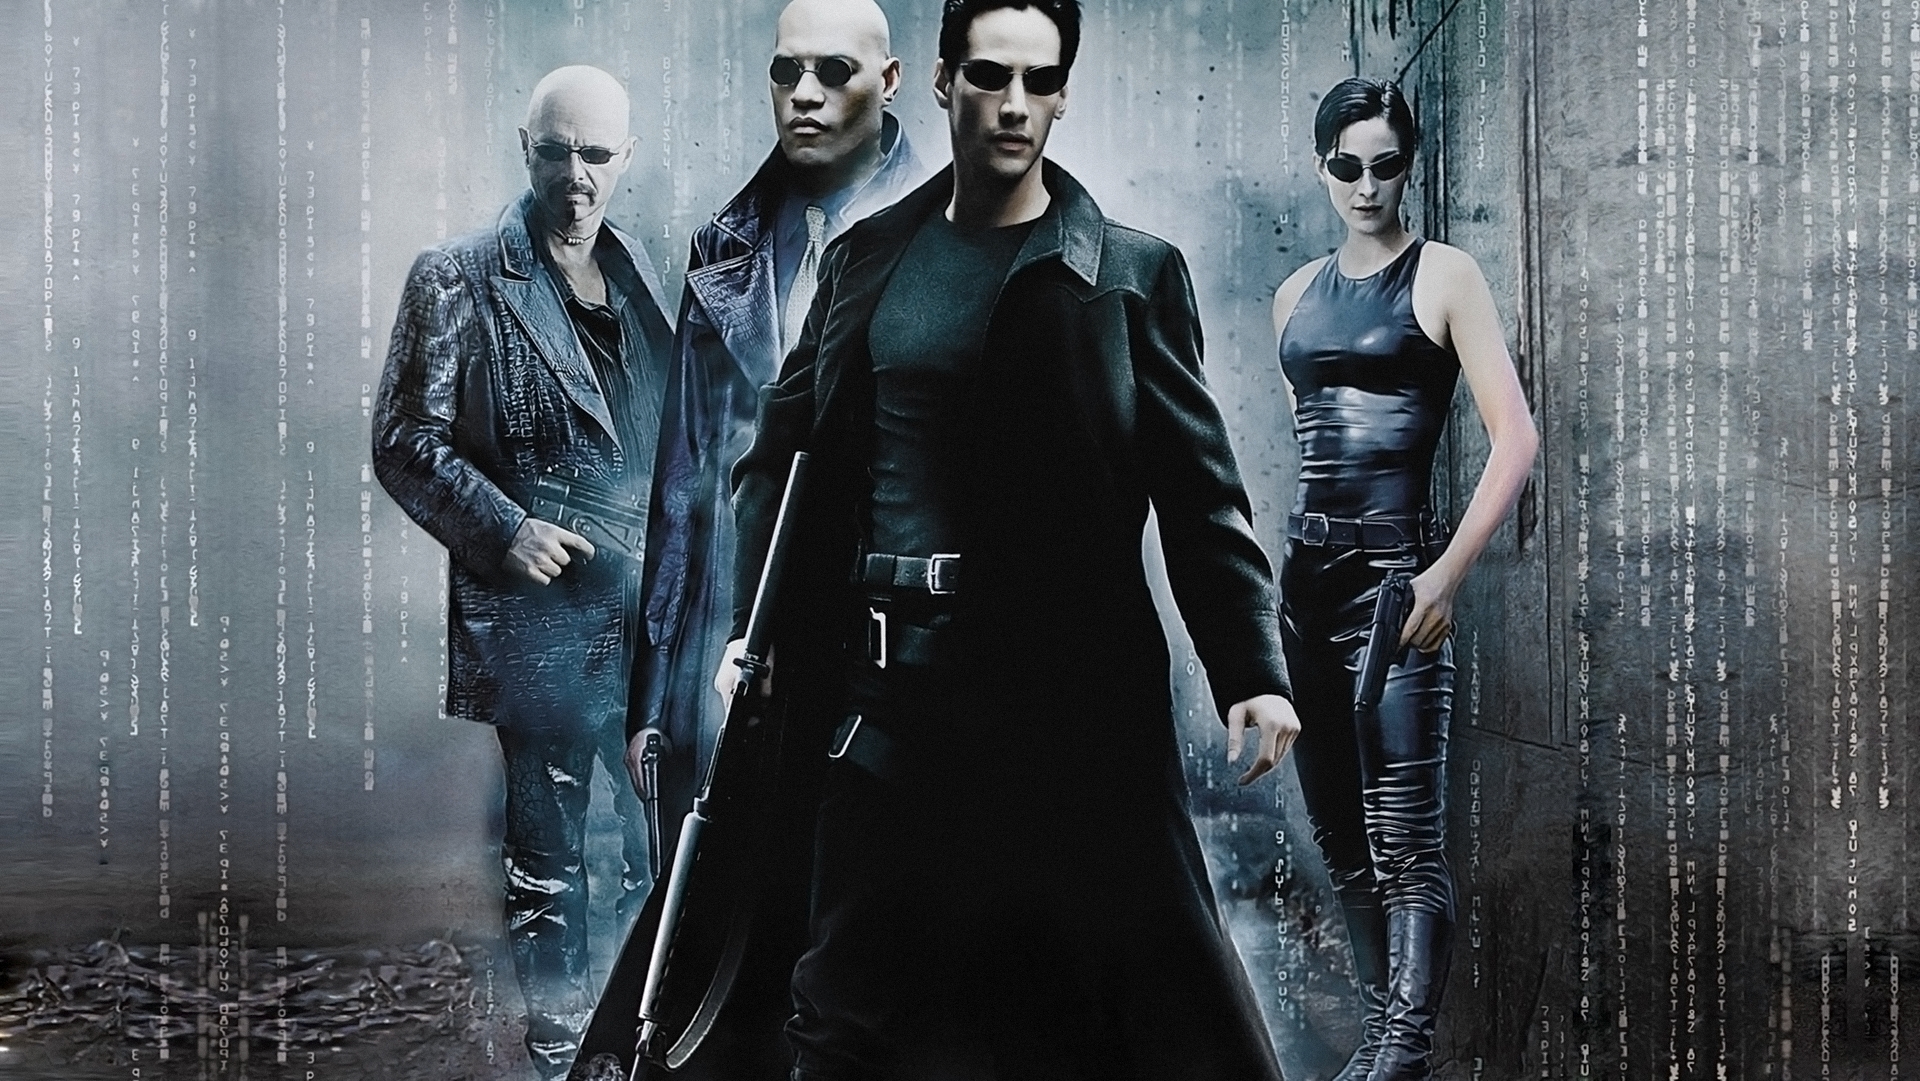 neo (the matrix), laurence fishburne, keanu reeves, movie, the matrix, carrie anne moss lock screen backgrounds